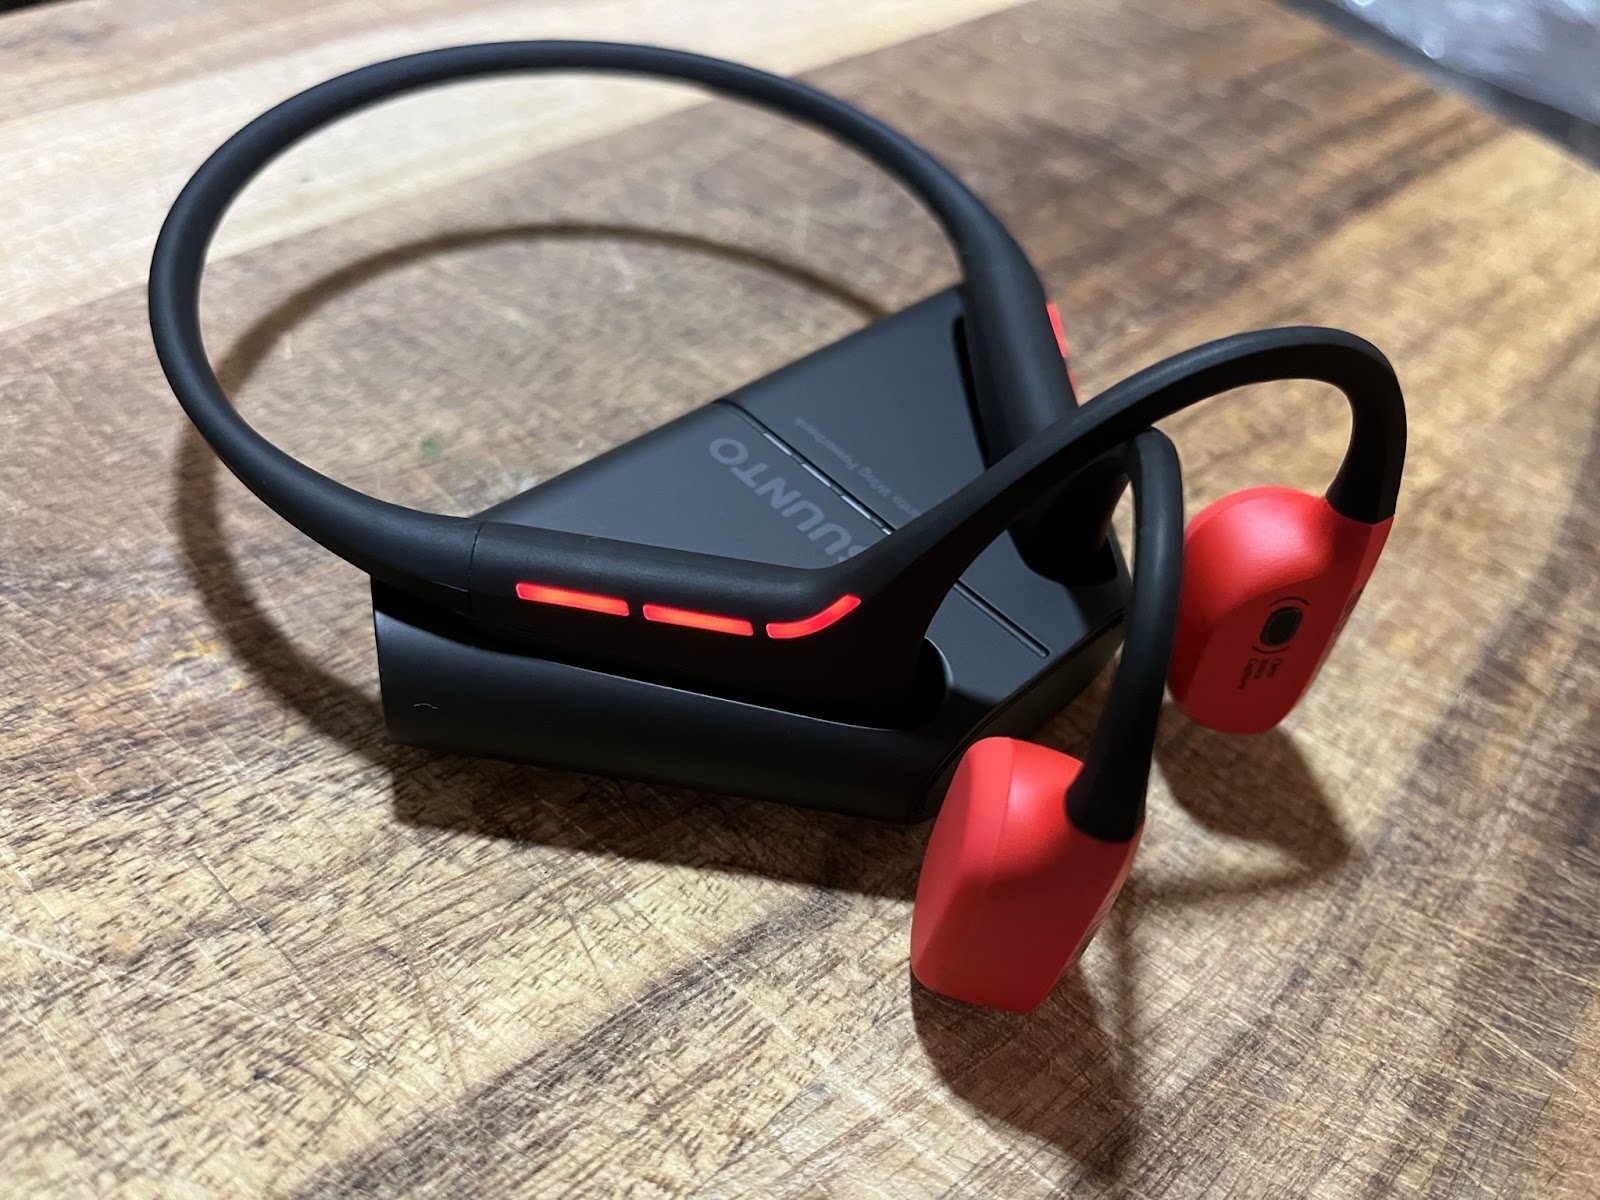  SUUNTO Wing Open-Ear Bone Conduction Headphone, Bluetooth  Wireless Sport Headphone w/Head Movement Control, Built-in HD Mic, IP67  Sweatproof, Safety Lights, 10H Playtime & 20H w/Charging Stand, Red :  Electronics